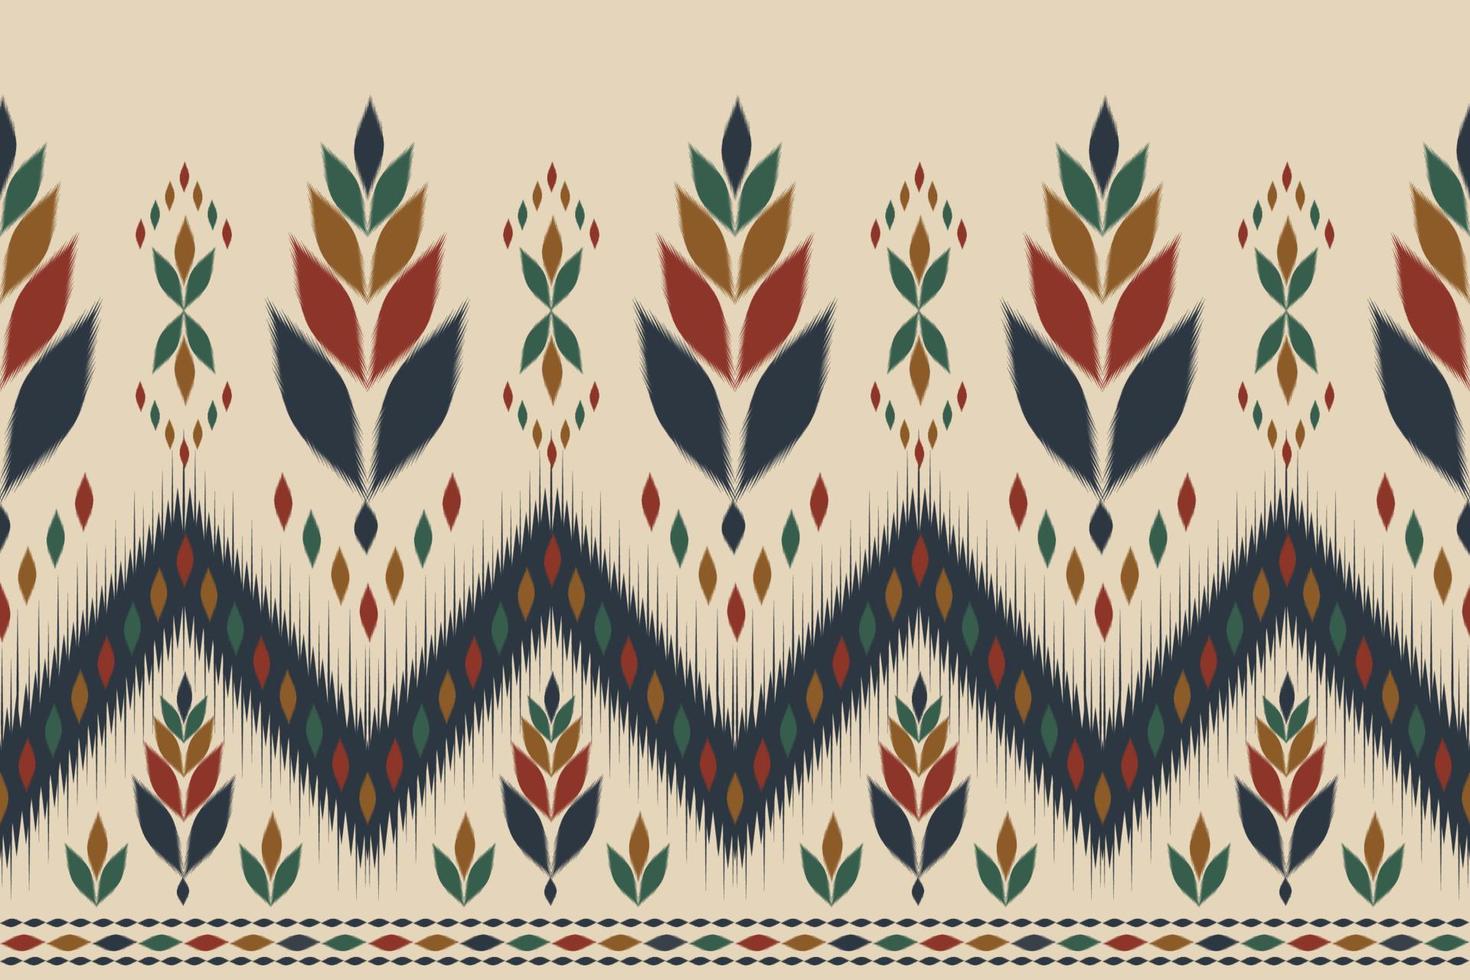 Abstract ikat pattern in tribal. Ethnic oriental style. Design for background, illustration, wrapping, clothing, batik, fabric, carpet, embroidery. vector